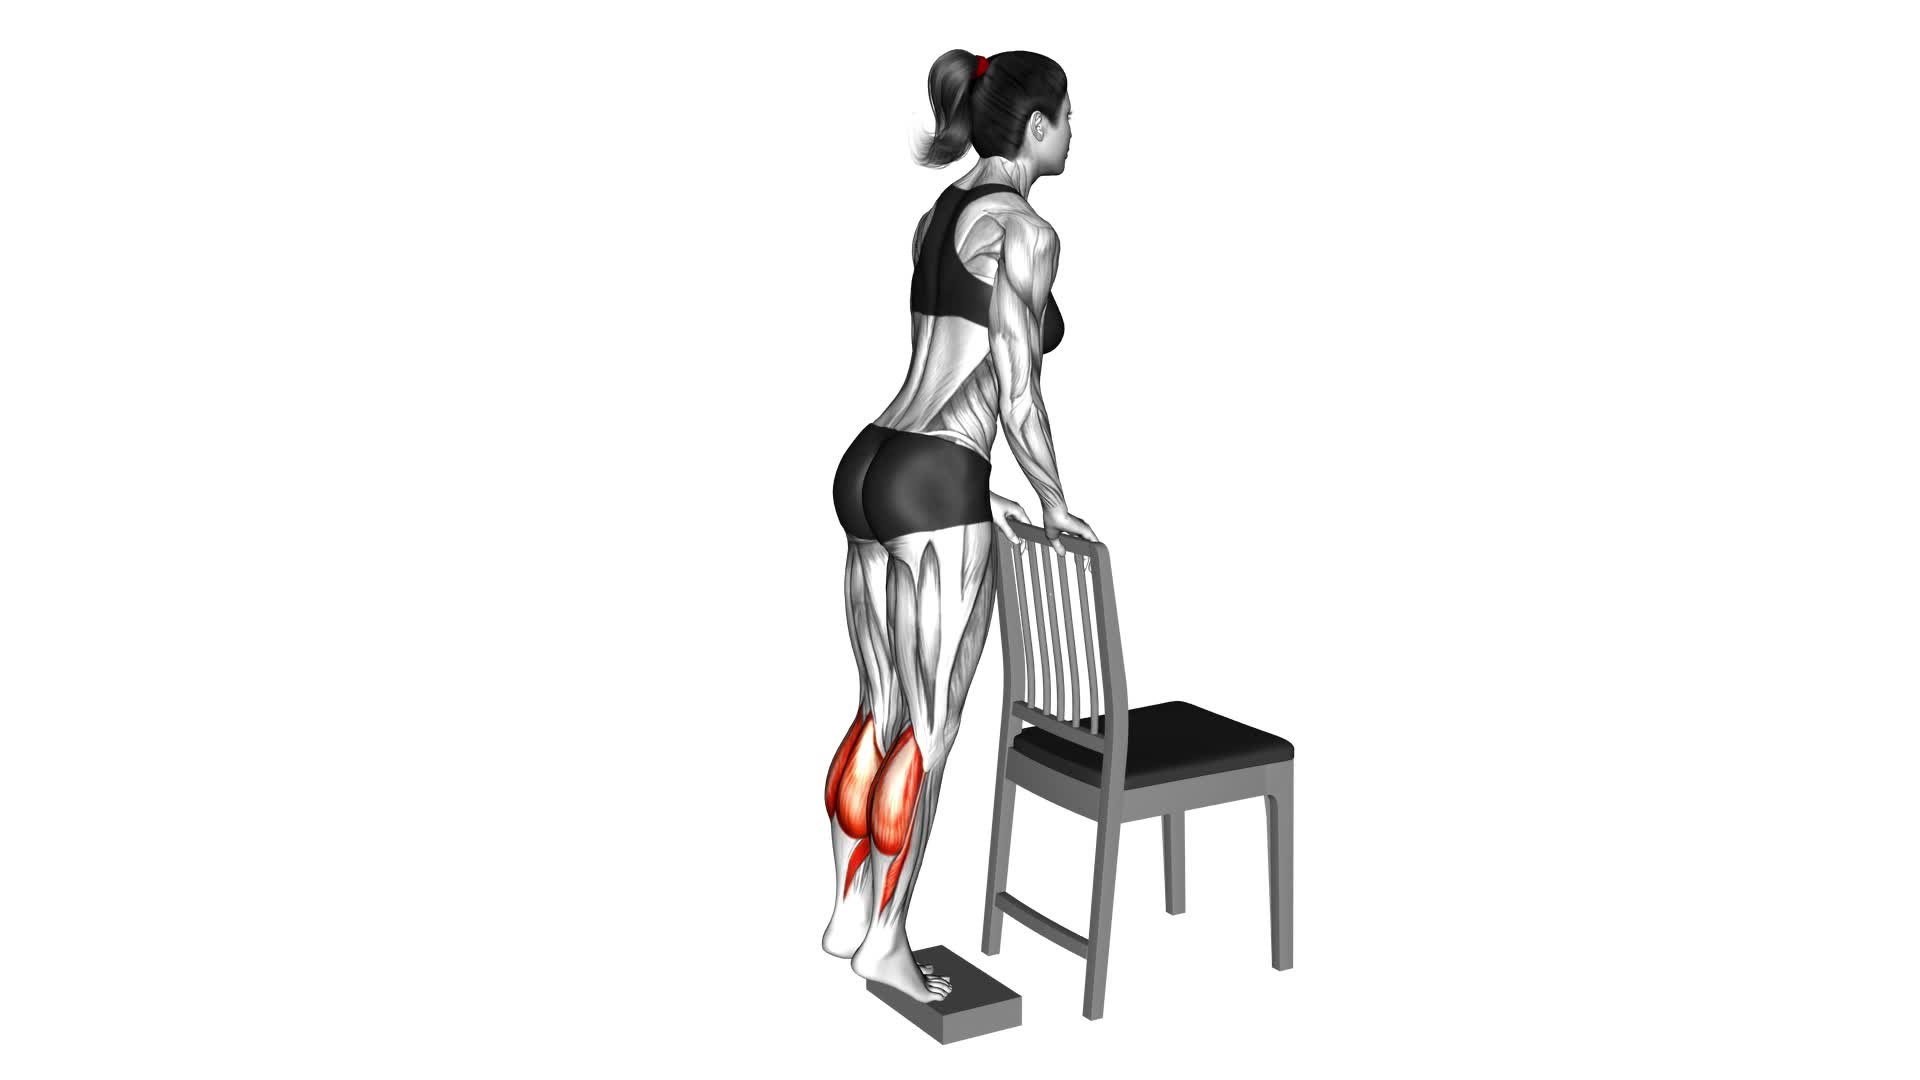 Calf Raise From Deficit With Chair Supported (Female) - Video Exercise Guide & Tips